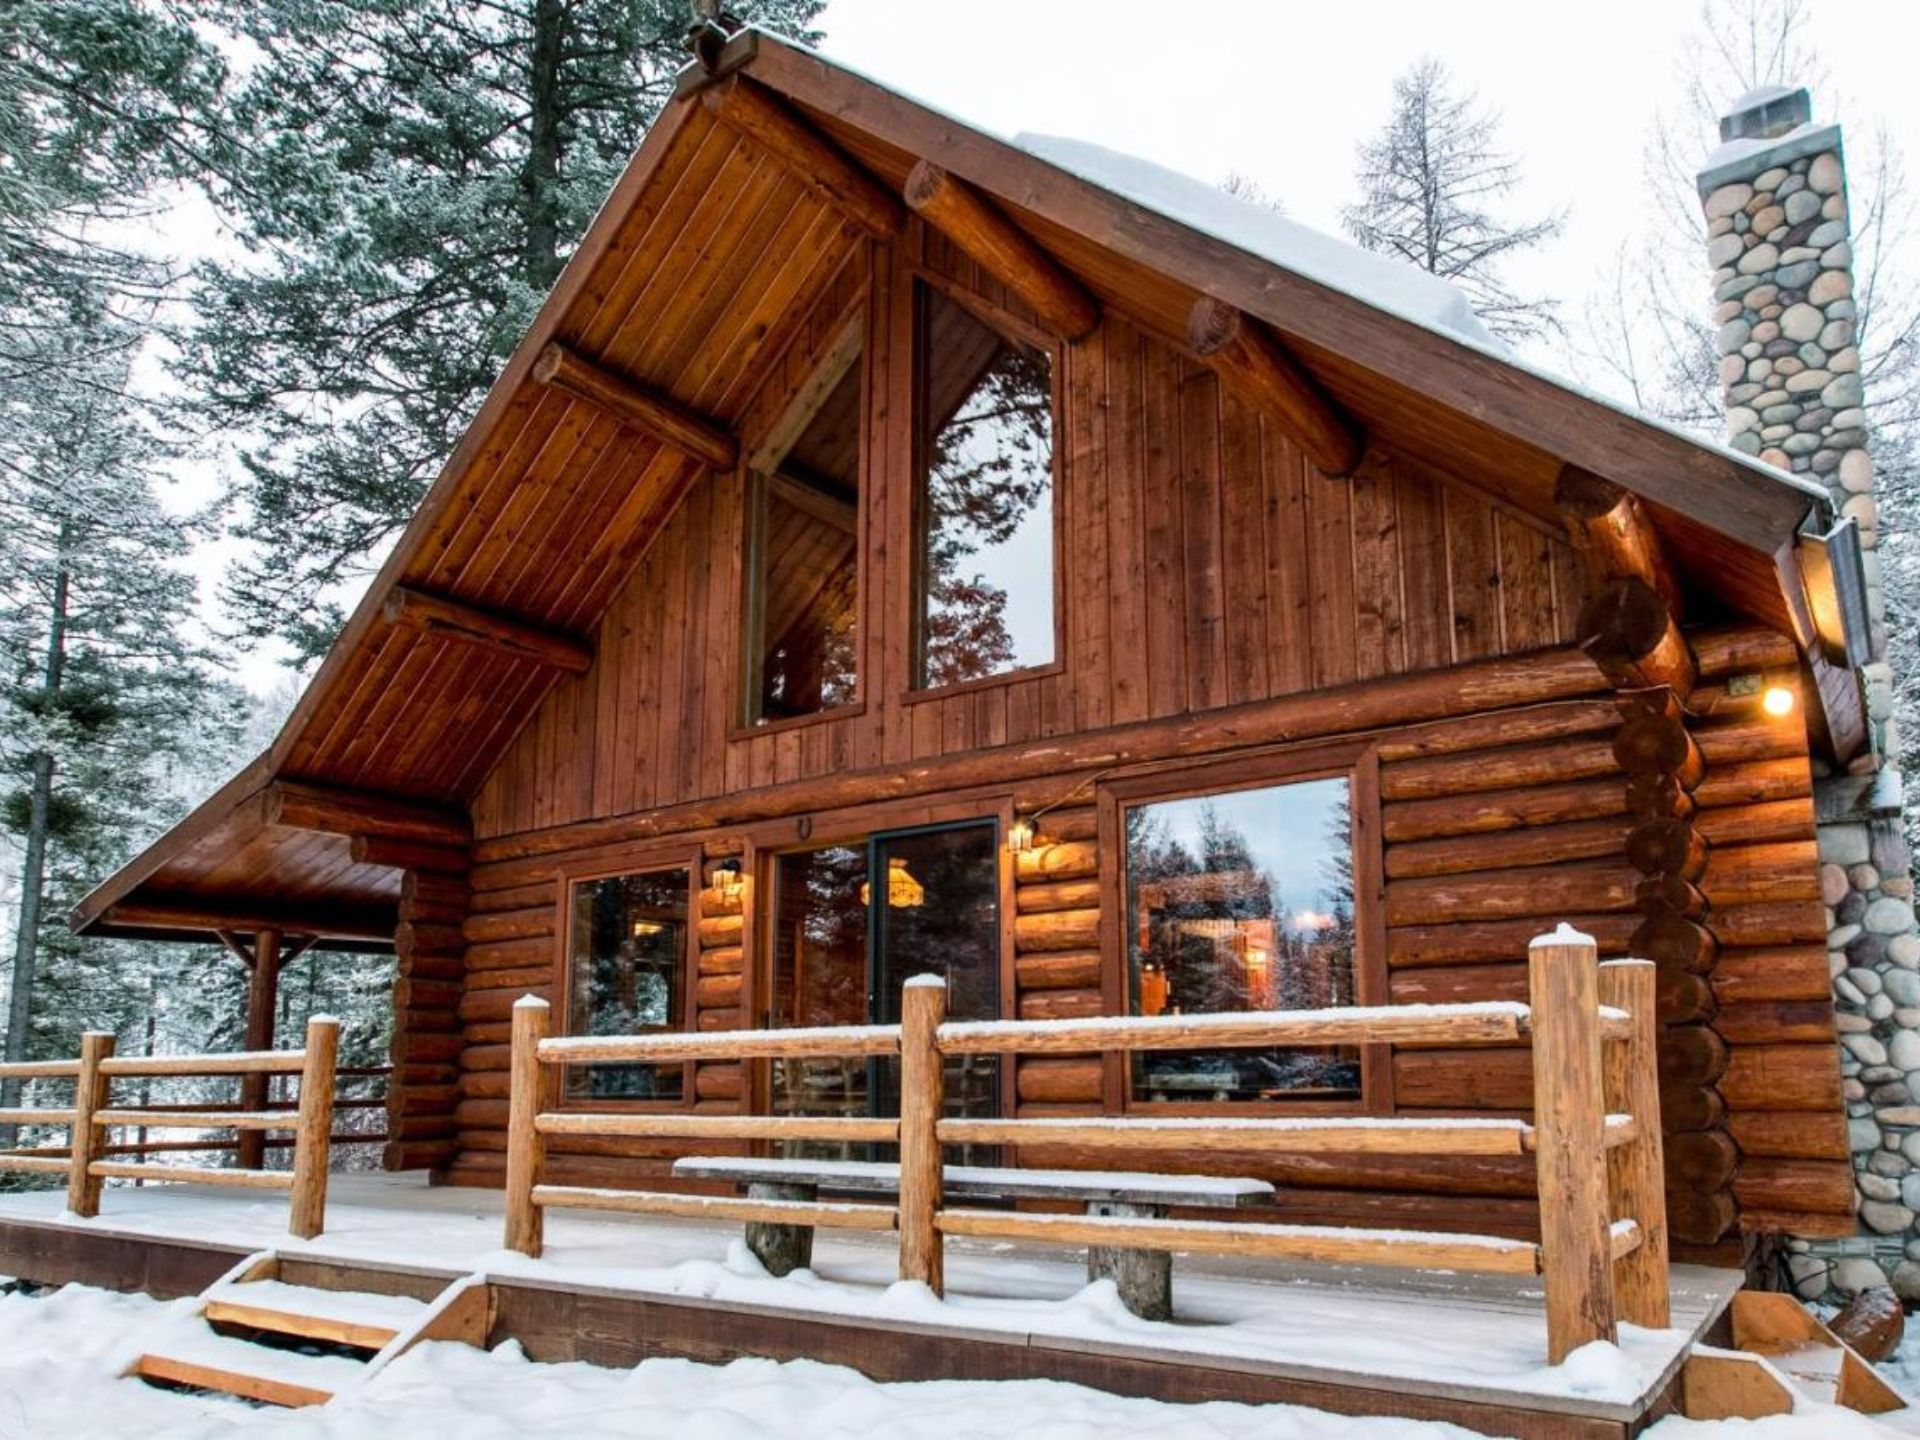 This Blacktail Cabin Is A Majestic Mountain Escape From Everyday Life